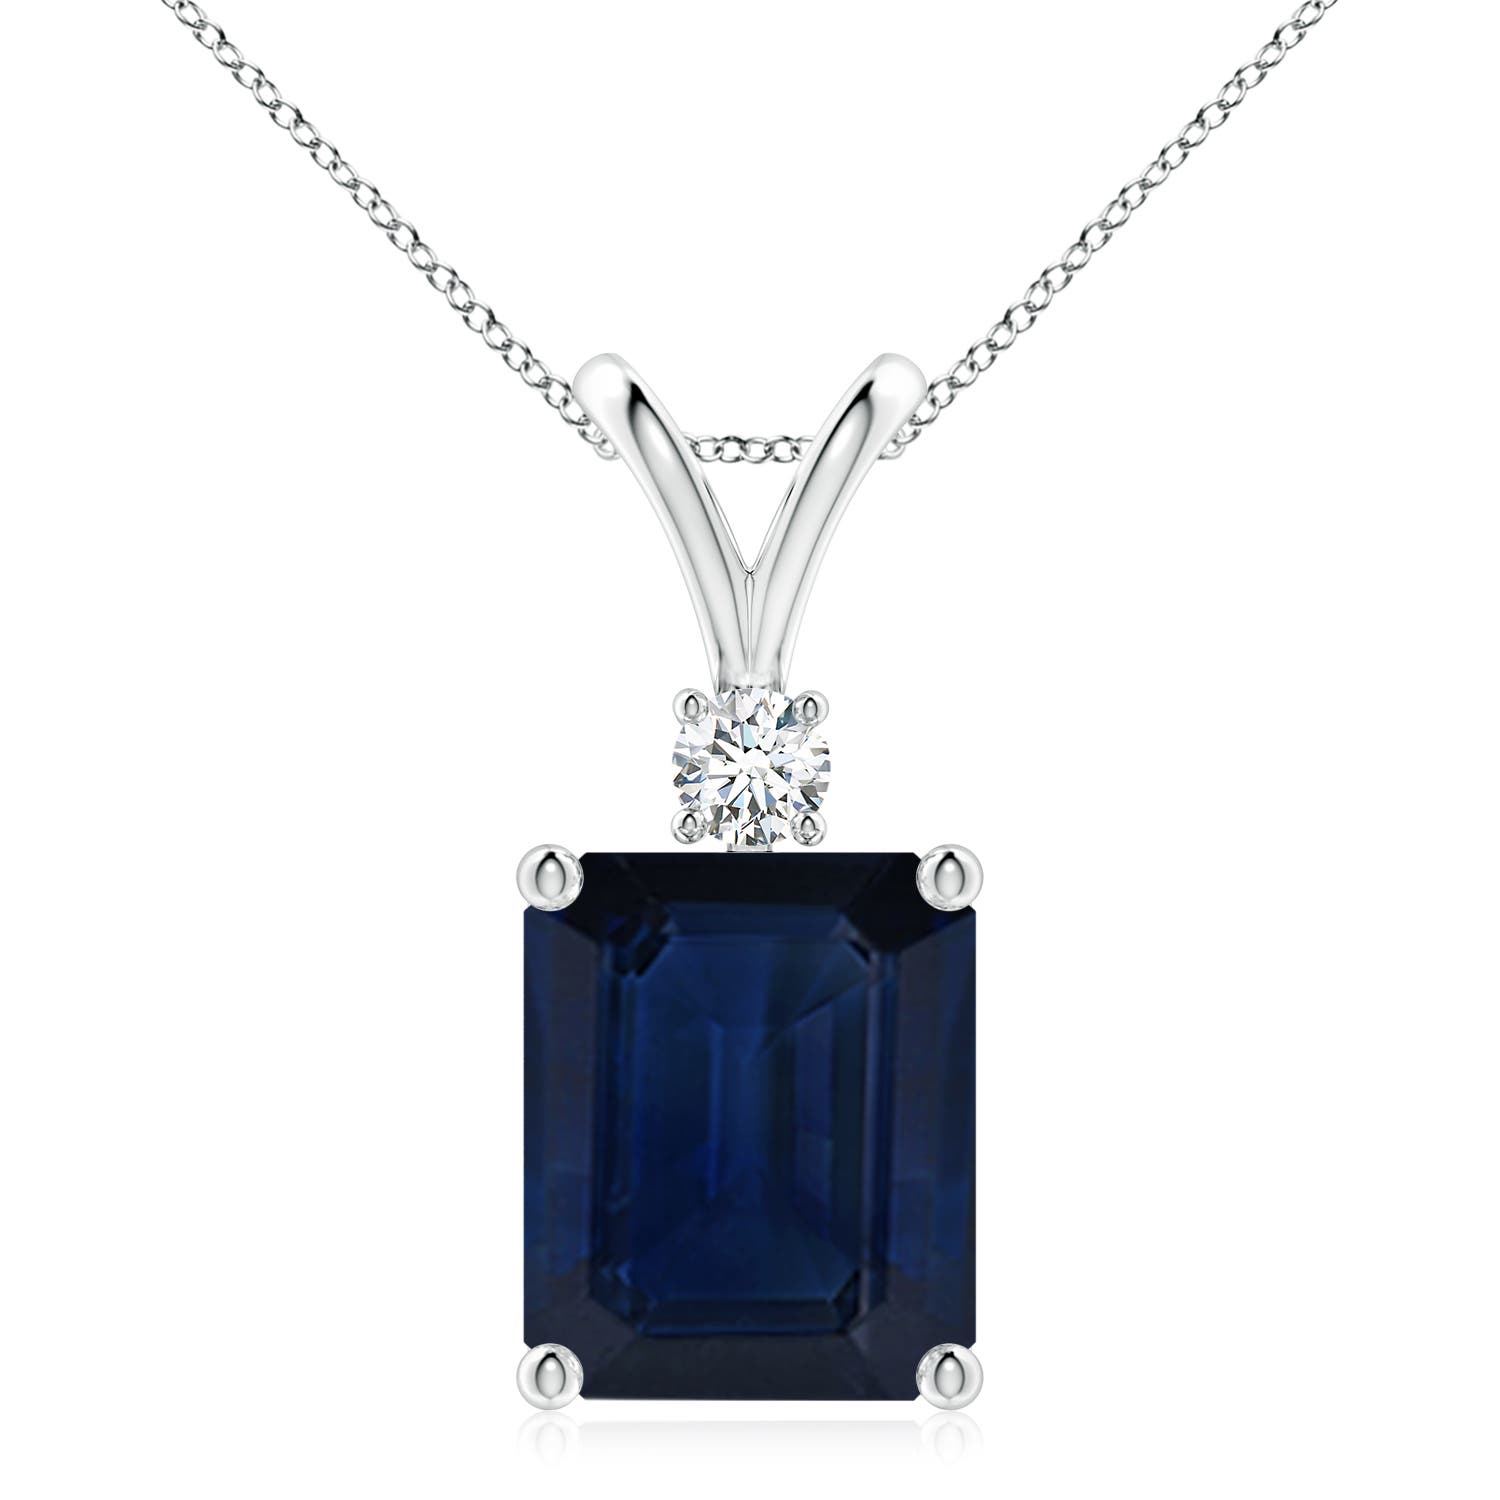 AA - Blue Sapphire / 5.66 CT / 14 KT White Gold